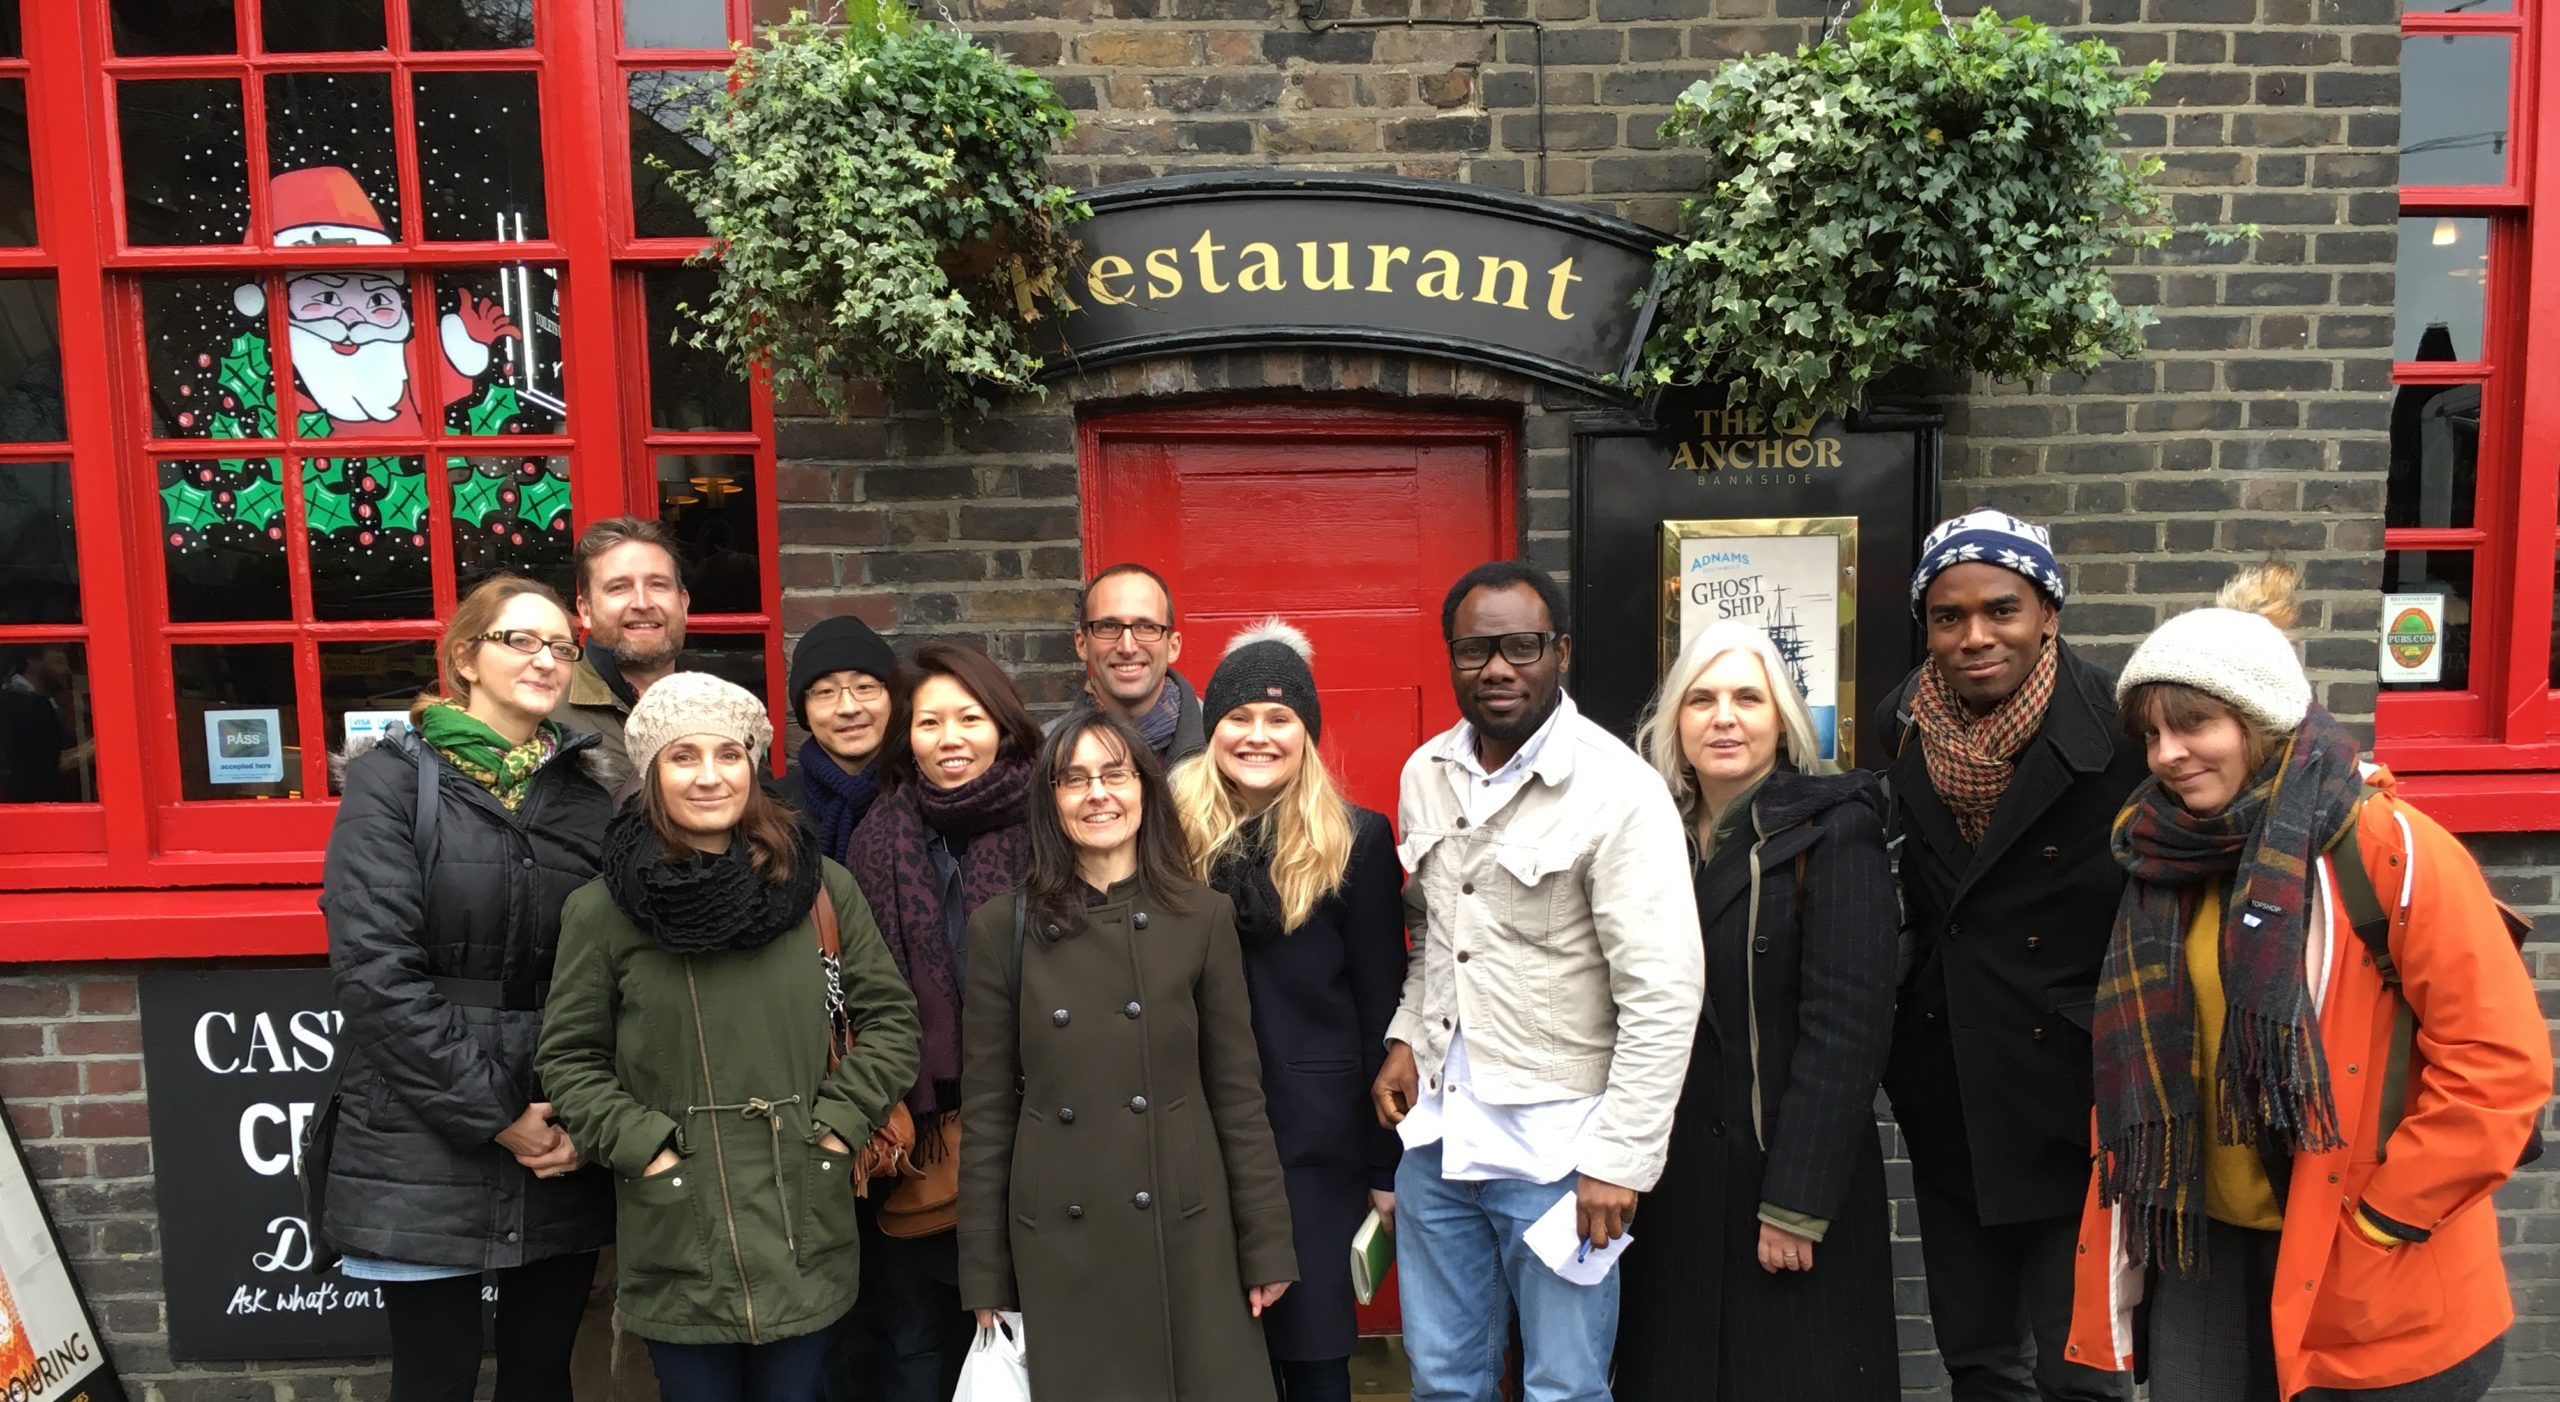 A new year adventure in London’s Borough Market